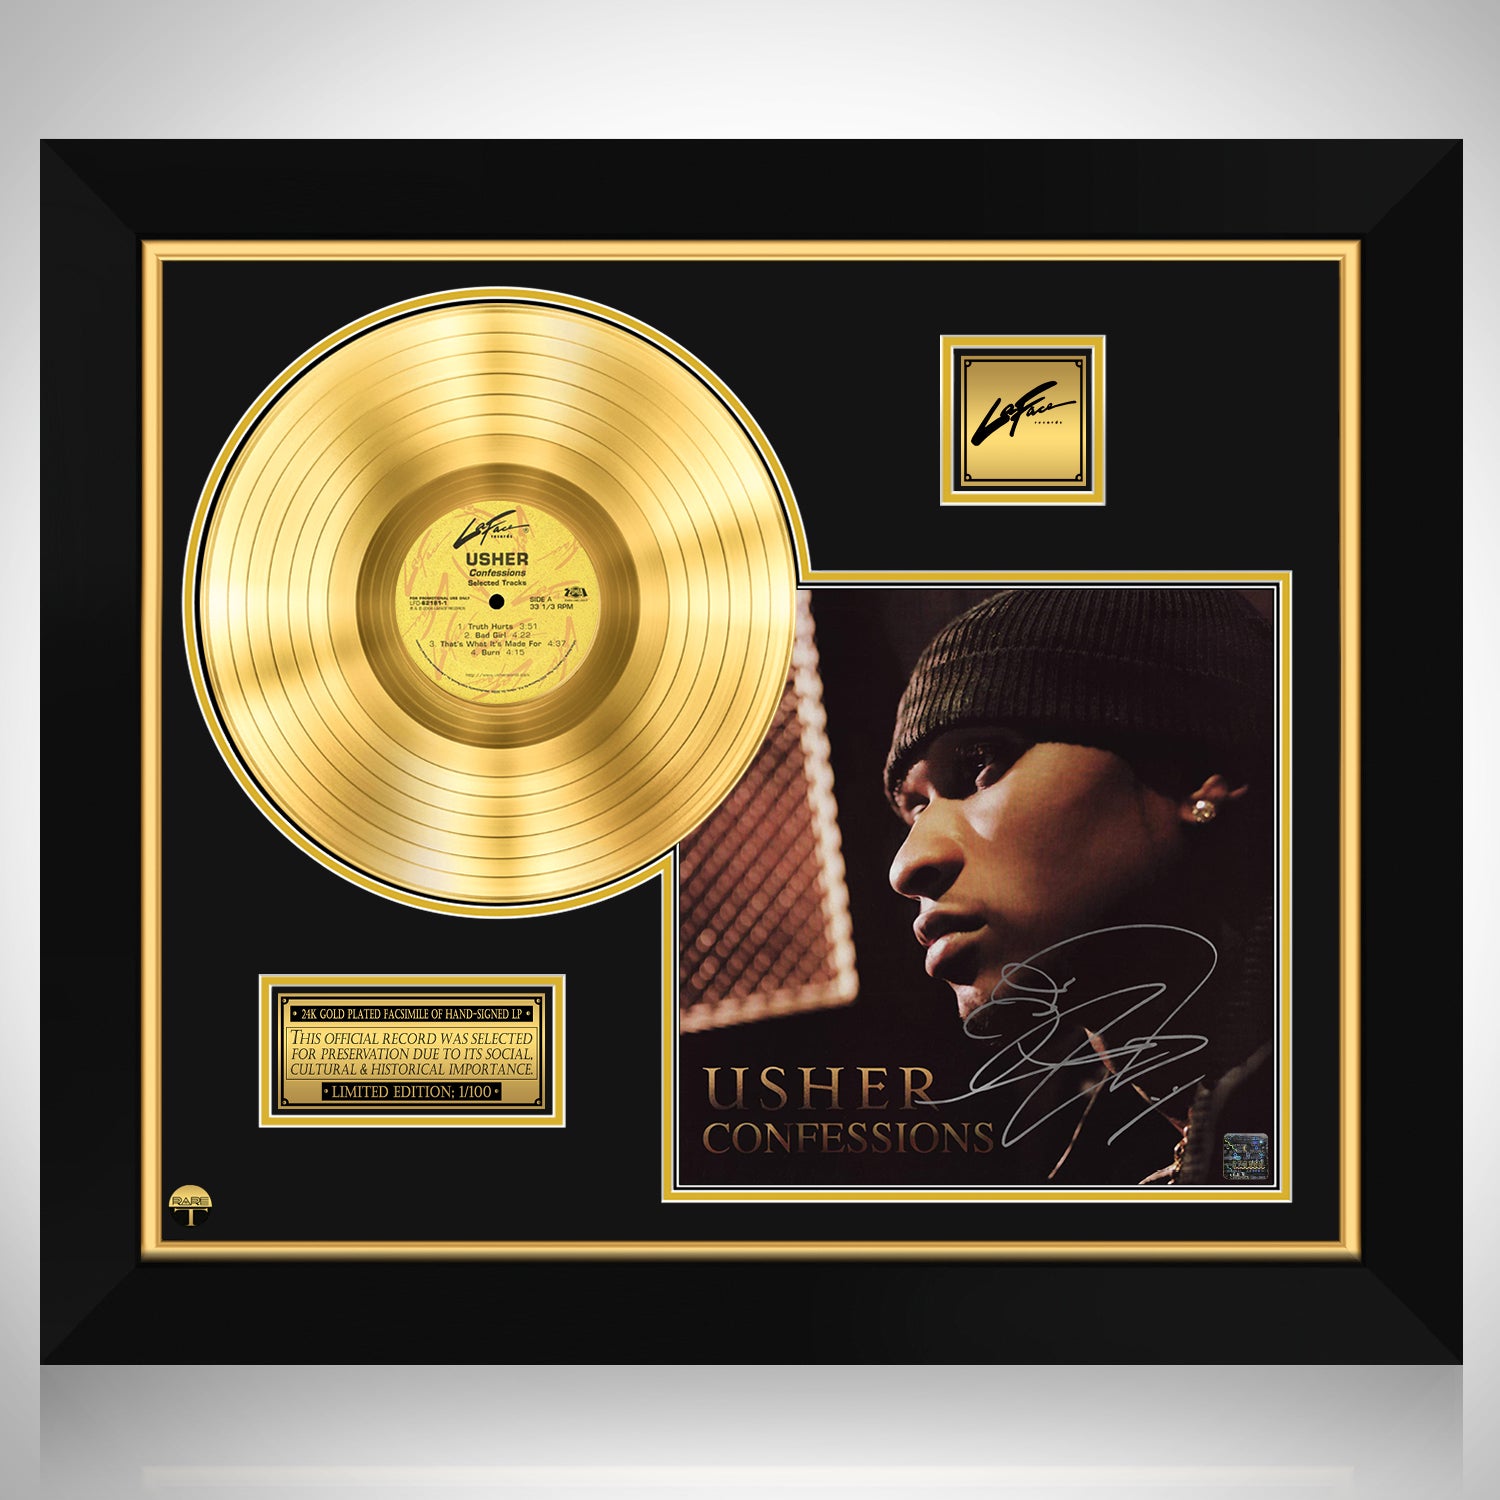 Usher Confessions Gold LP Limited Signature Edition Custom Frame